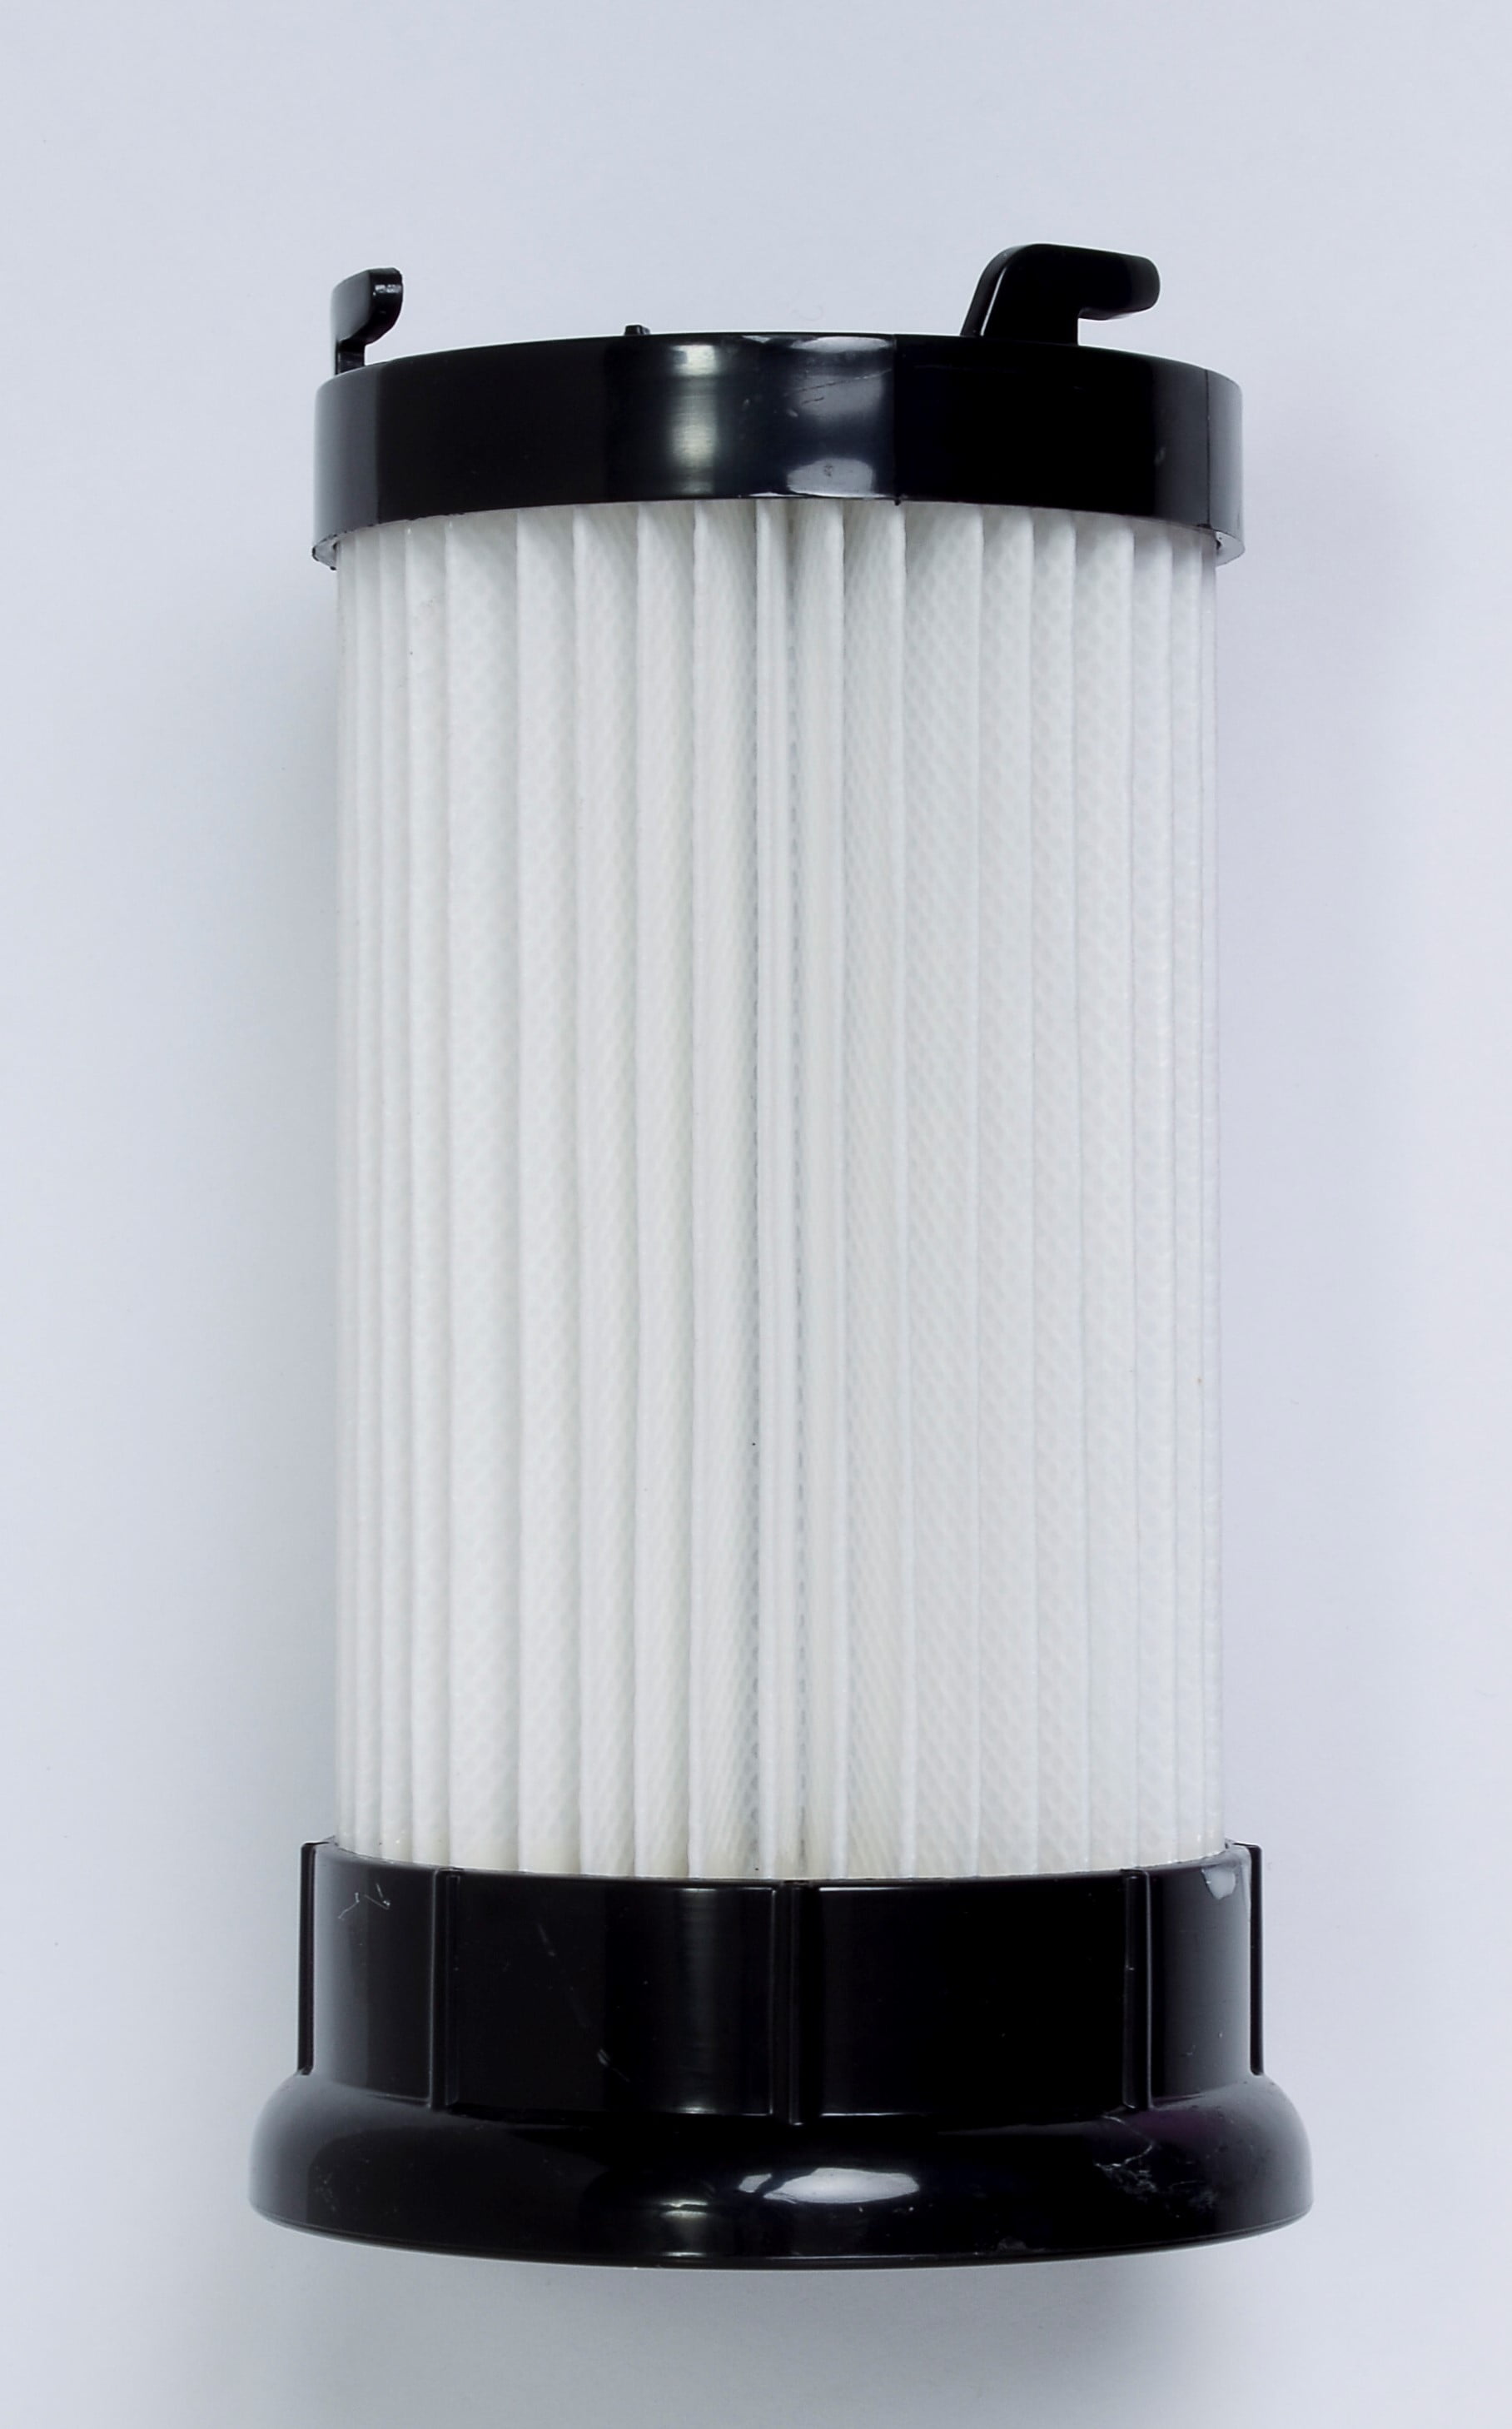 Vacuum Filter for Eureka AirSpeed AS1051A,AS1000A,AS1004A 